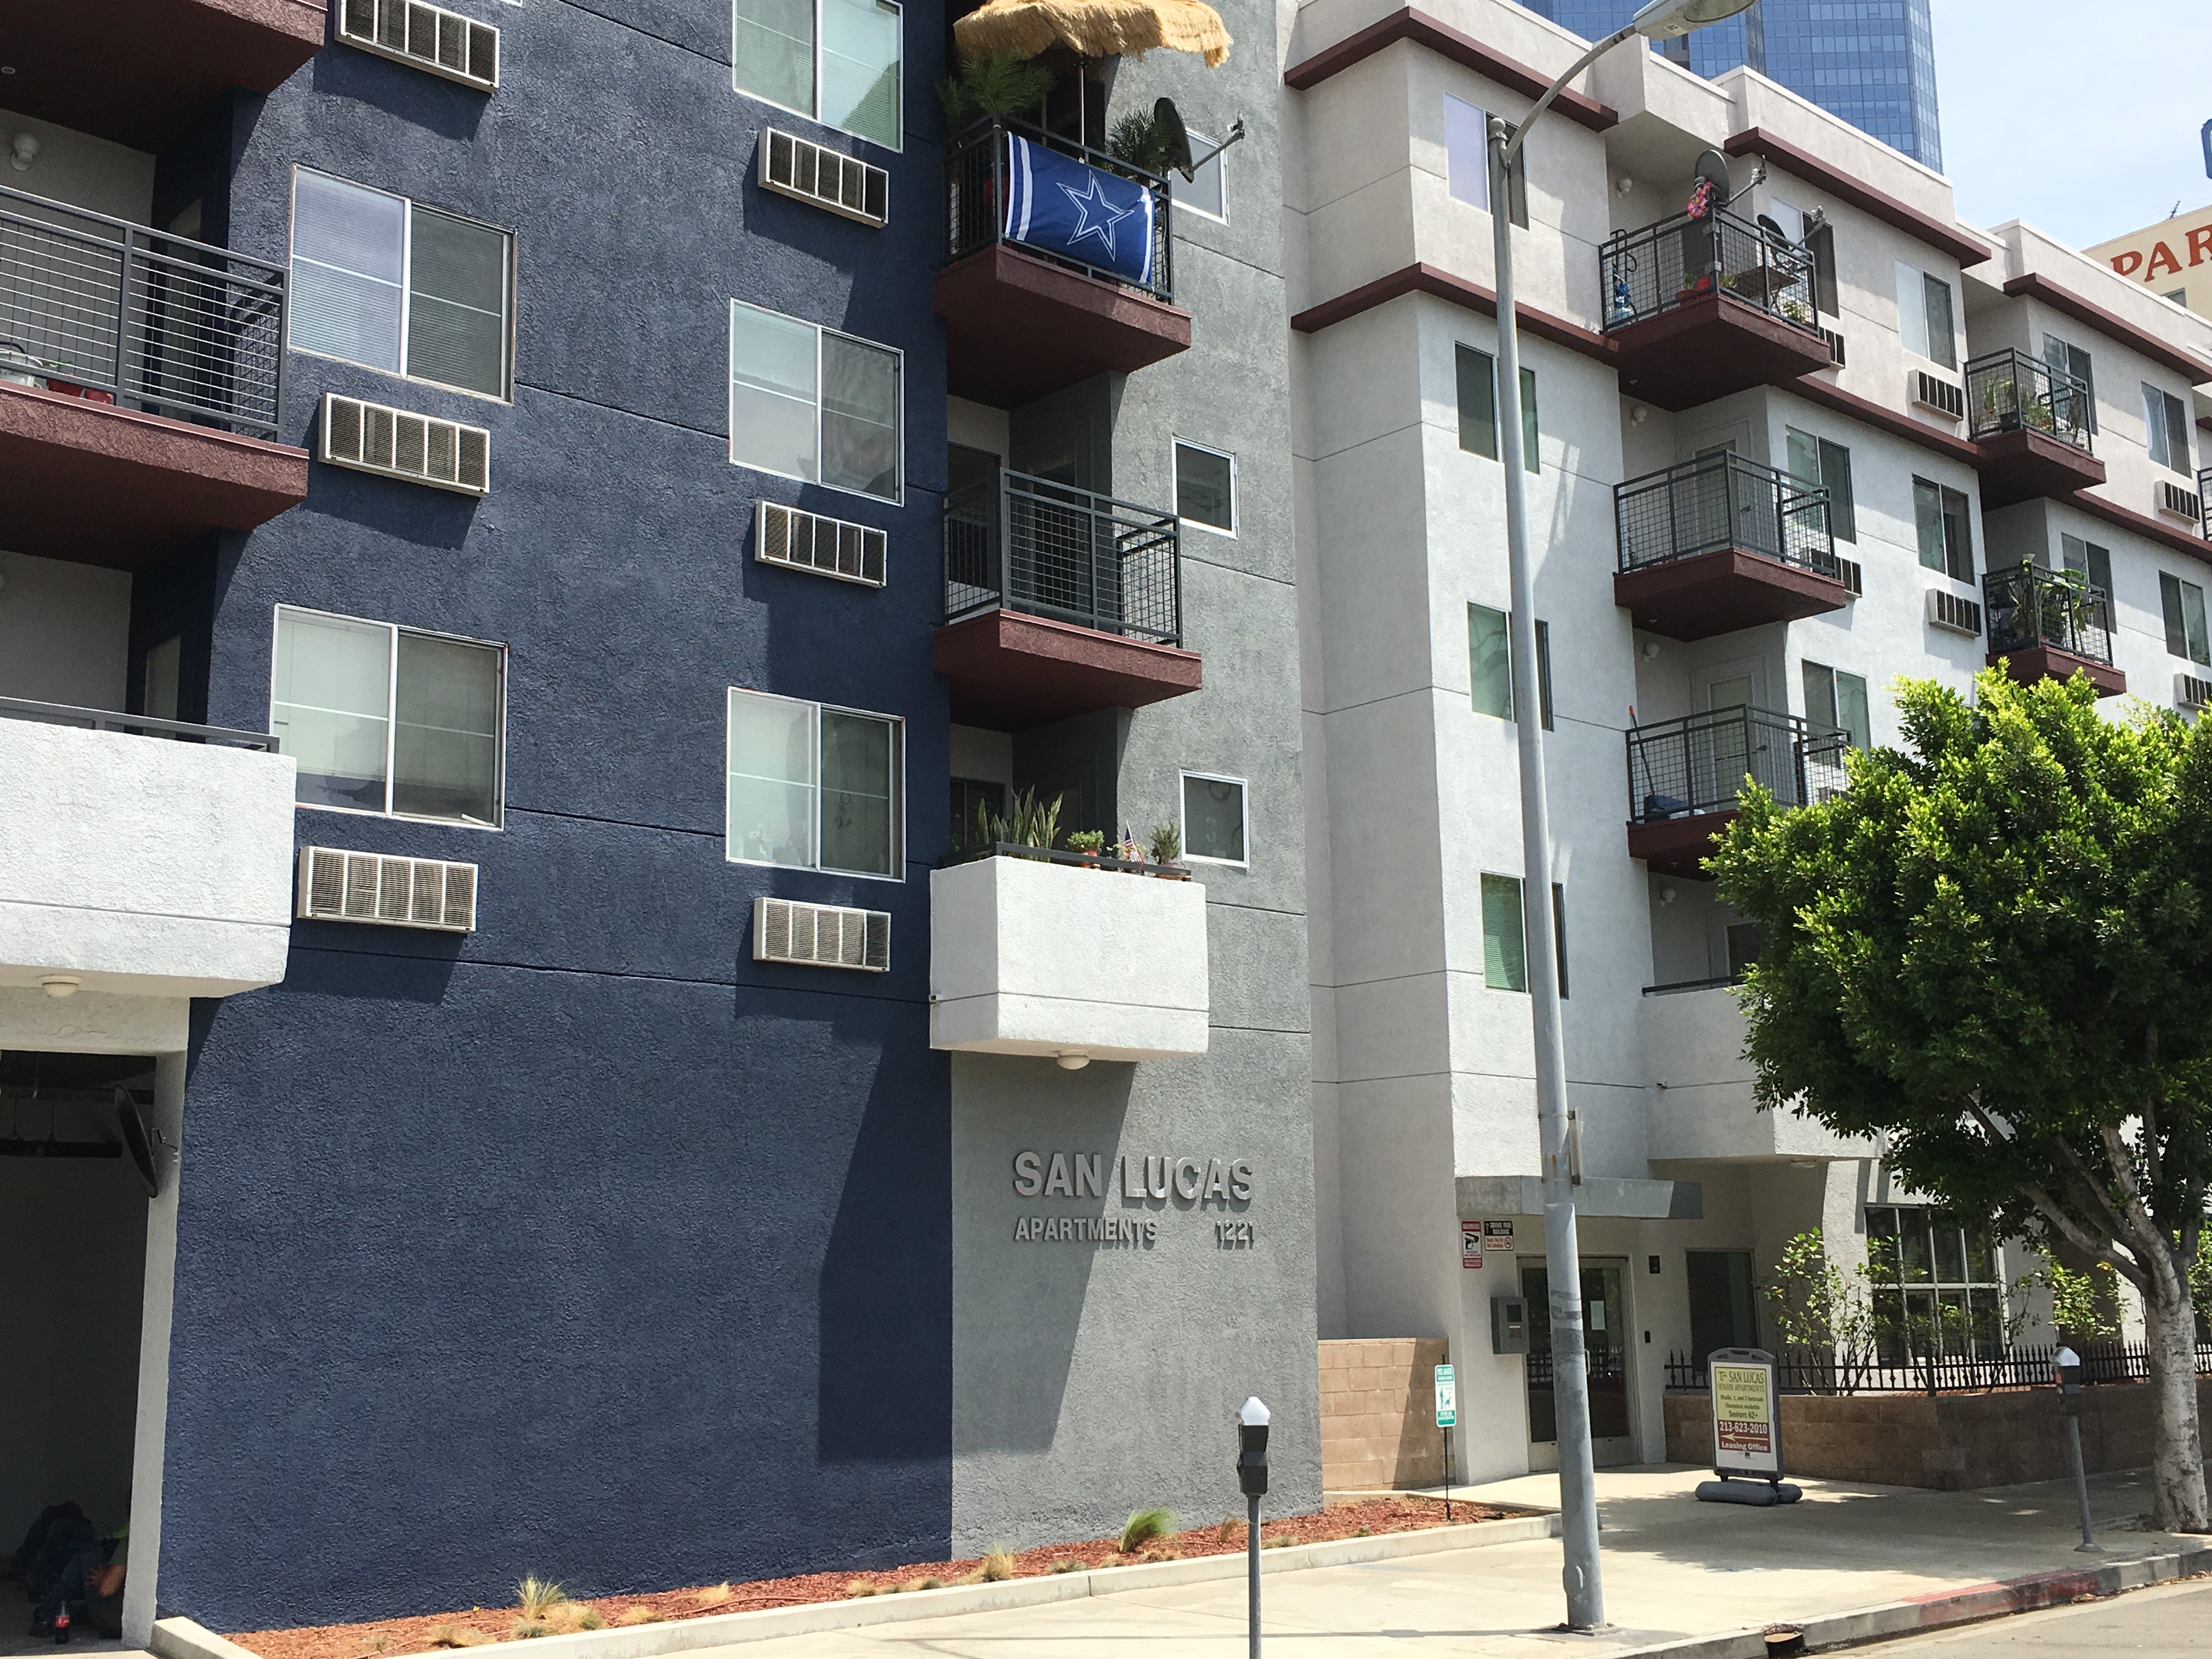 Street view of San Lucas Apartments, 5 story grey and blue building with balconies and lamp post in front